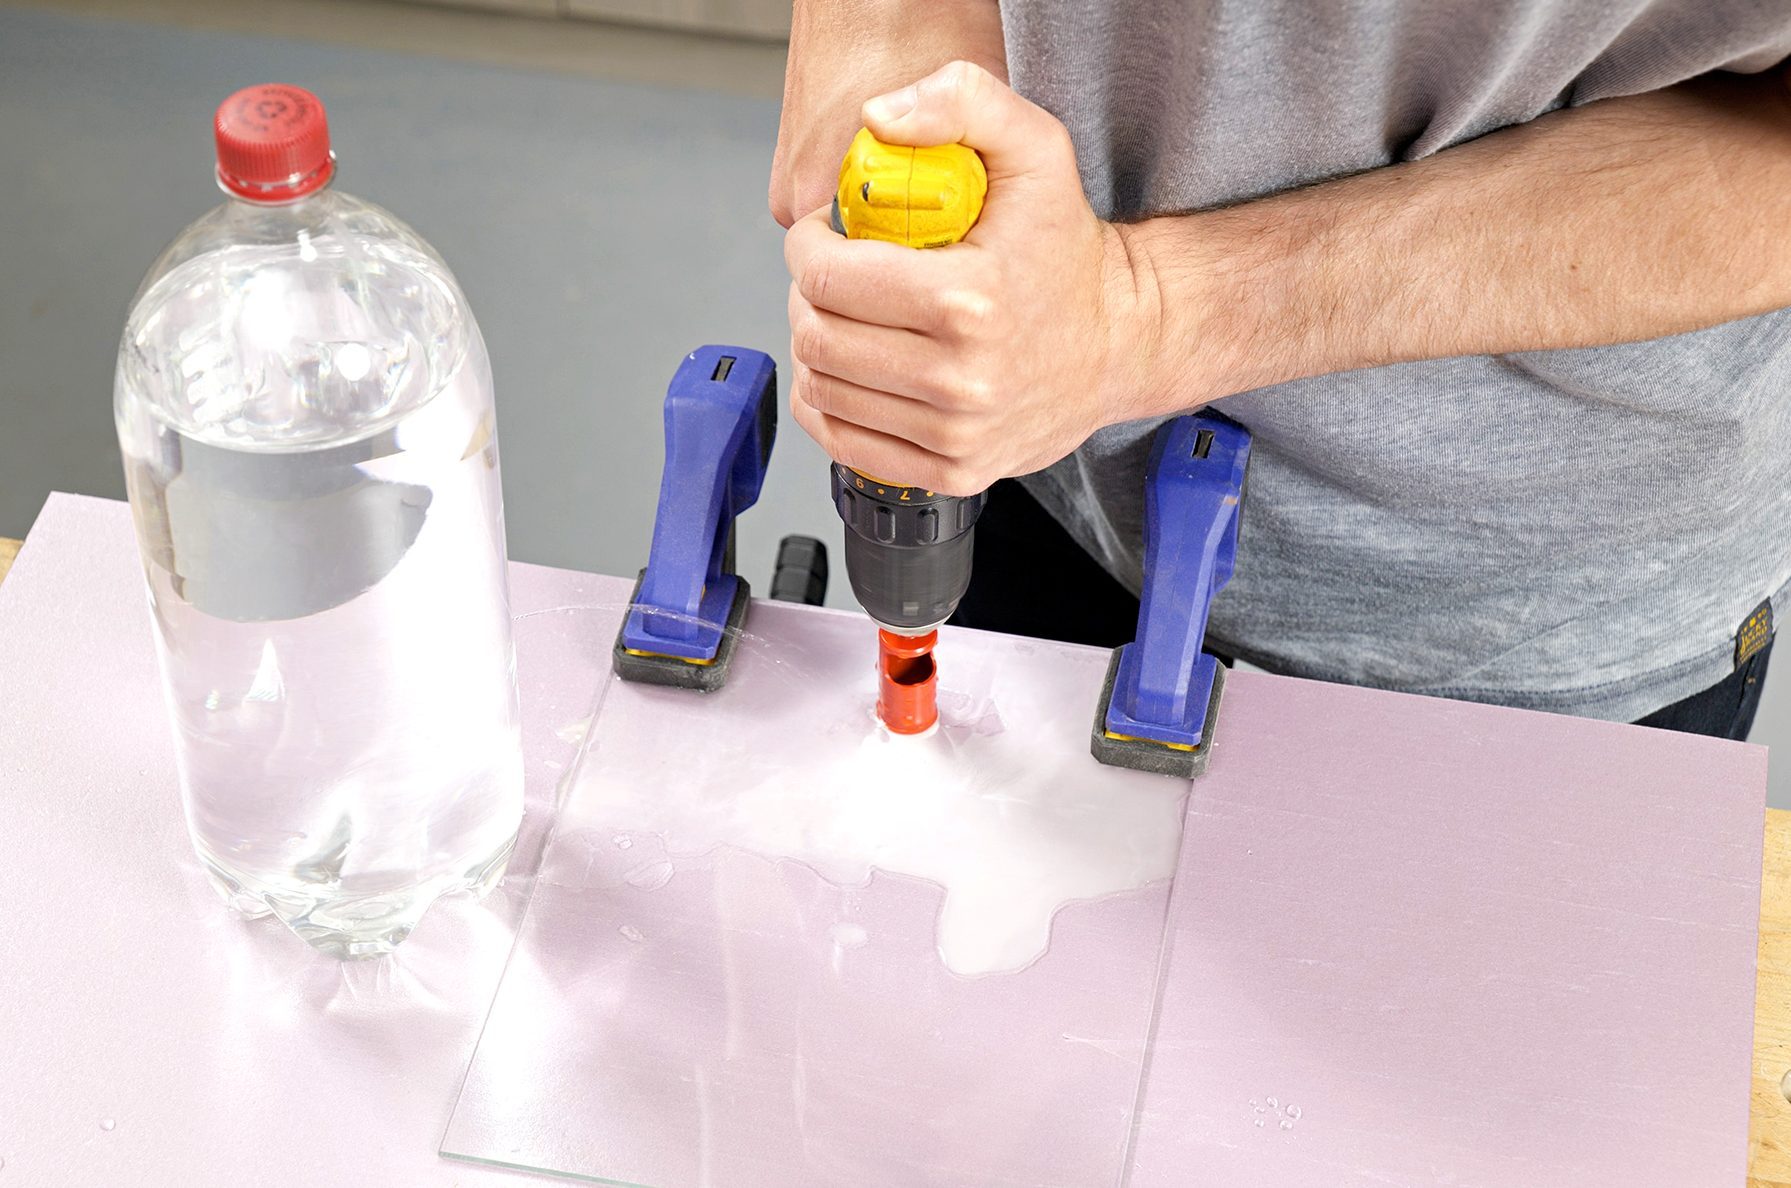 How To Drill a Hole in Glass Without Breaking It